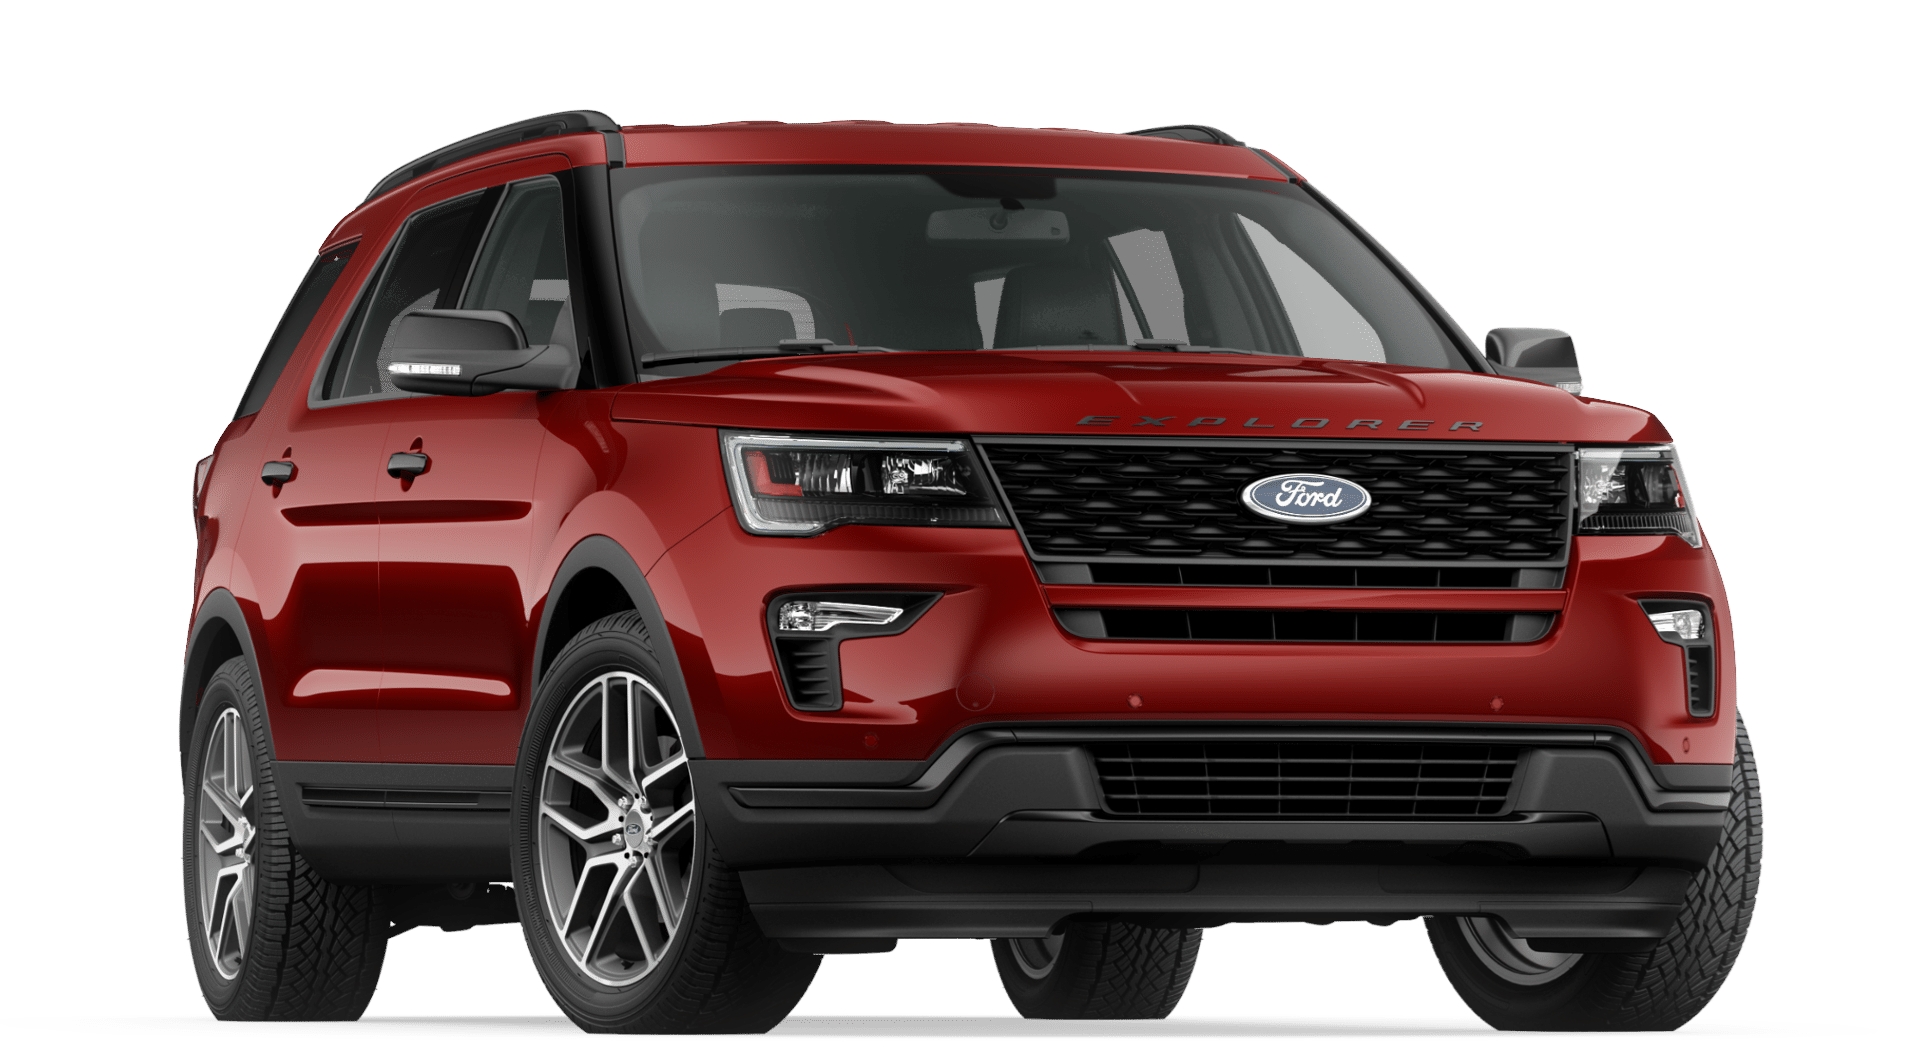 2018 Ford Explorer XLT Full Specs, Features and Price | CarBuzz